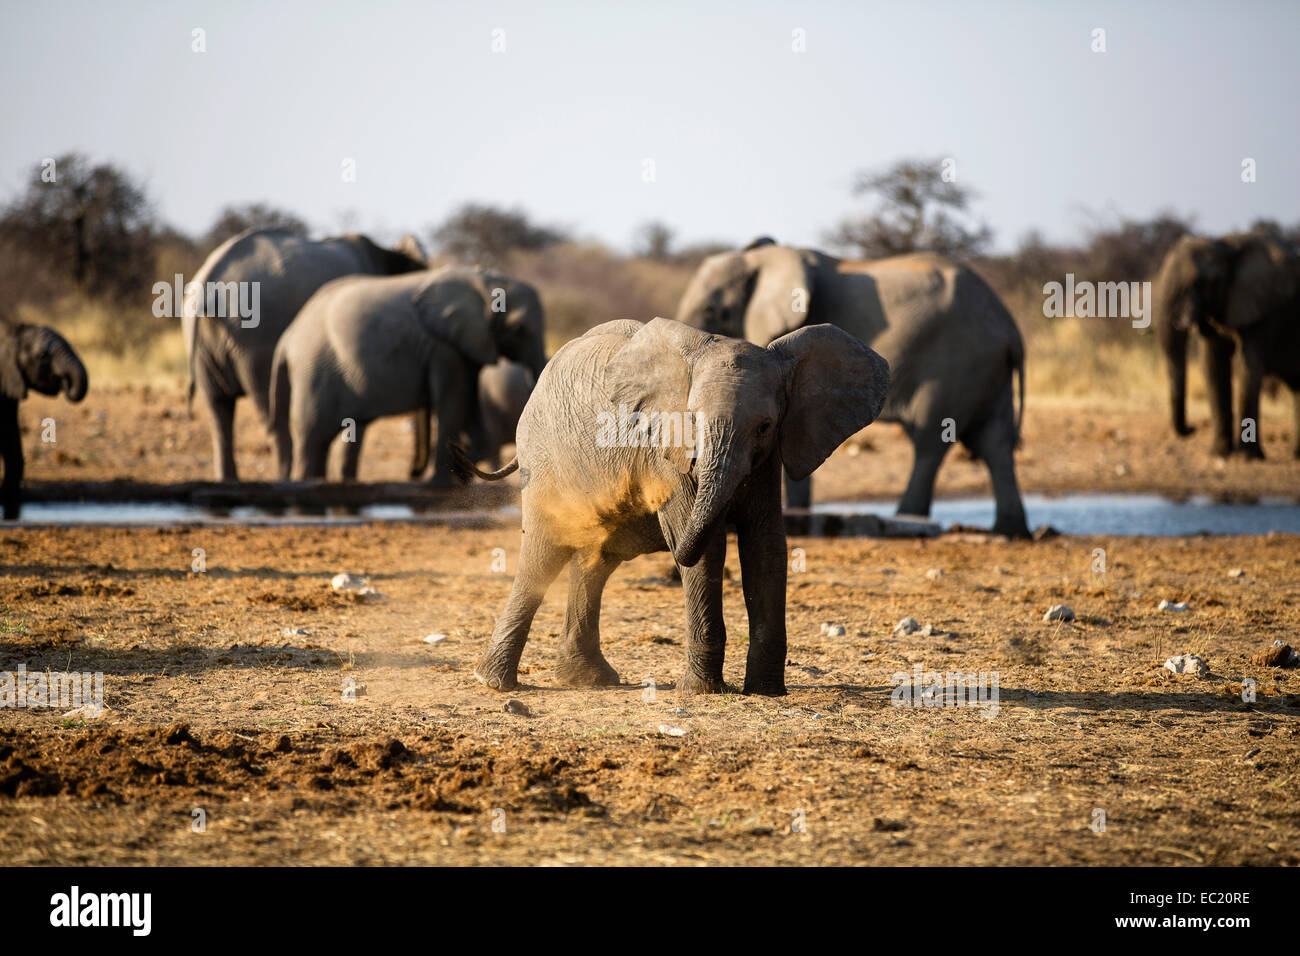 African elephants (Loxodonta africana), young animal at a dust bath, in the back elephants drinking at a waterhole Stock Photo